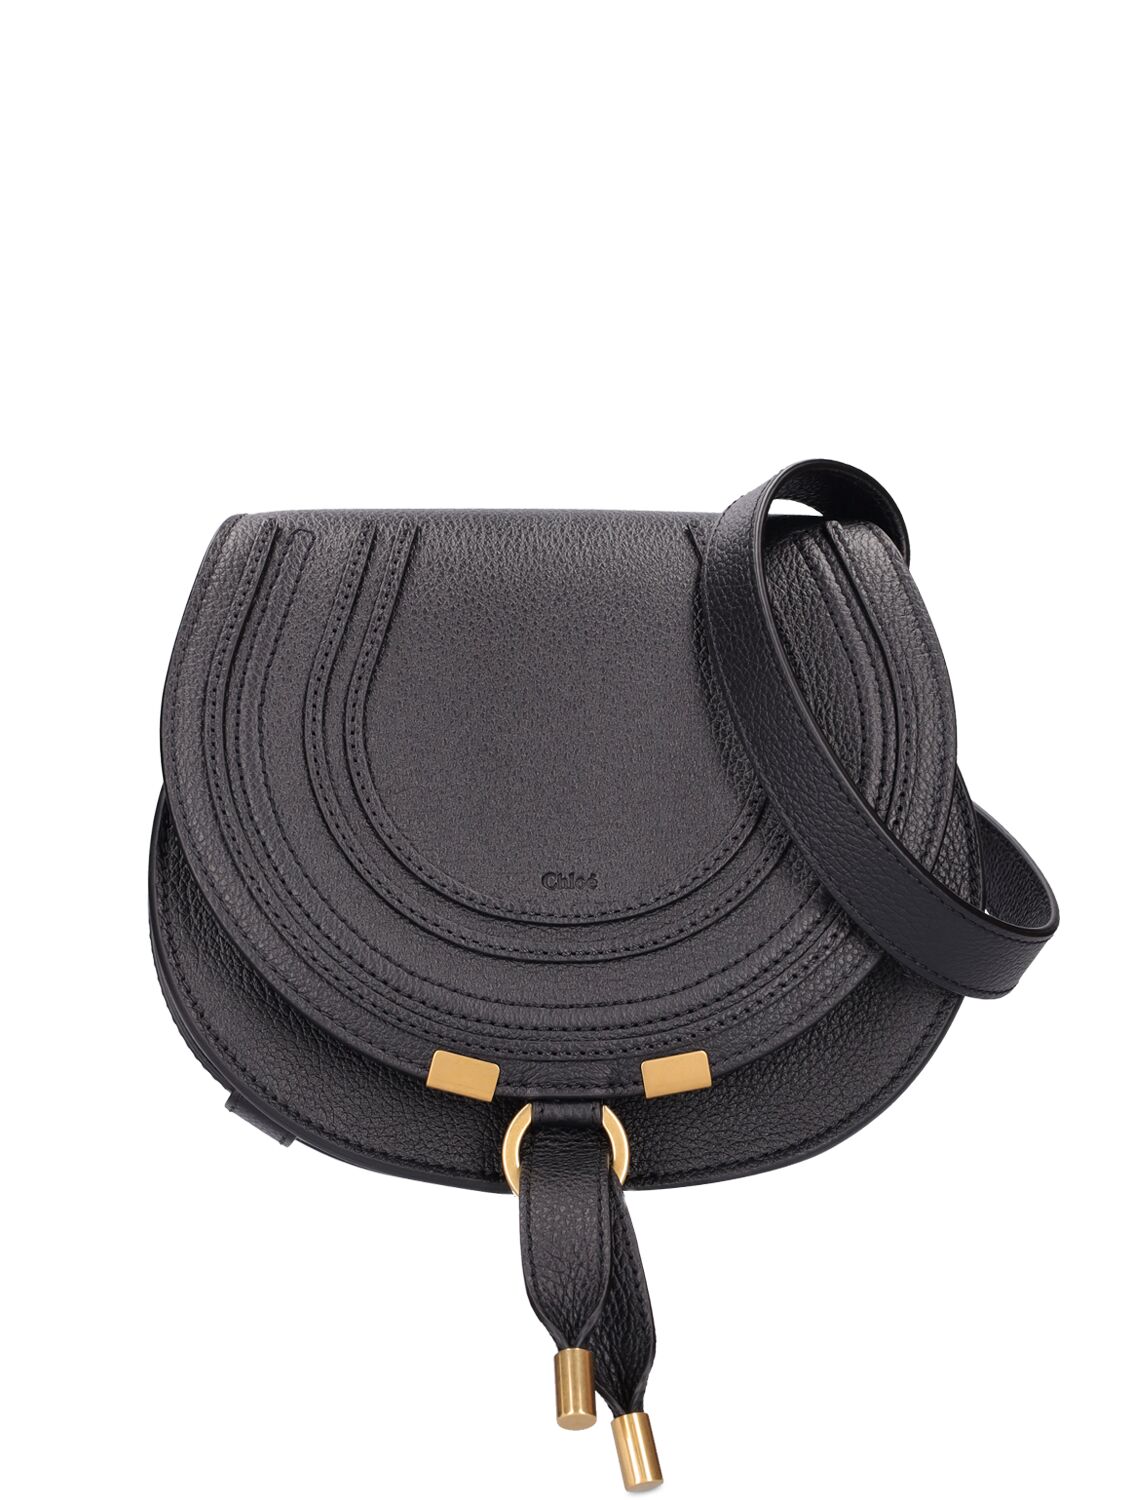 Chloé Small Marcie Leather Shoulder Bag In Black